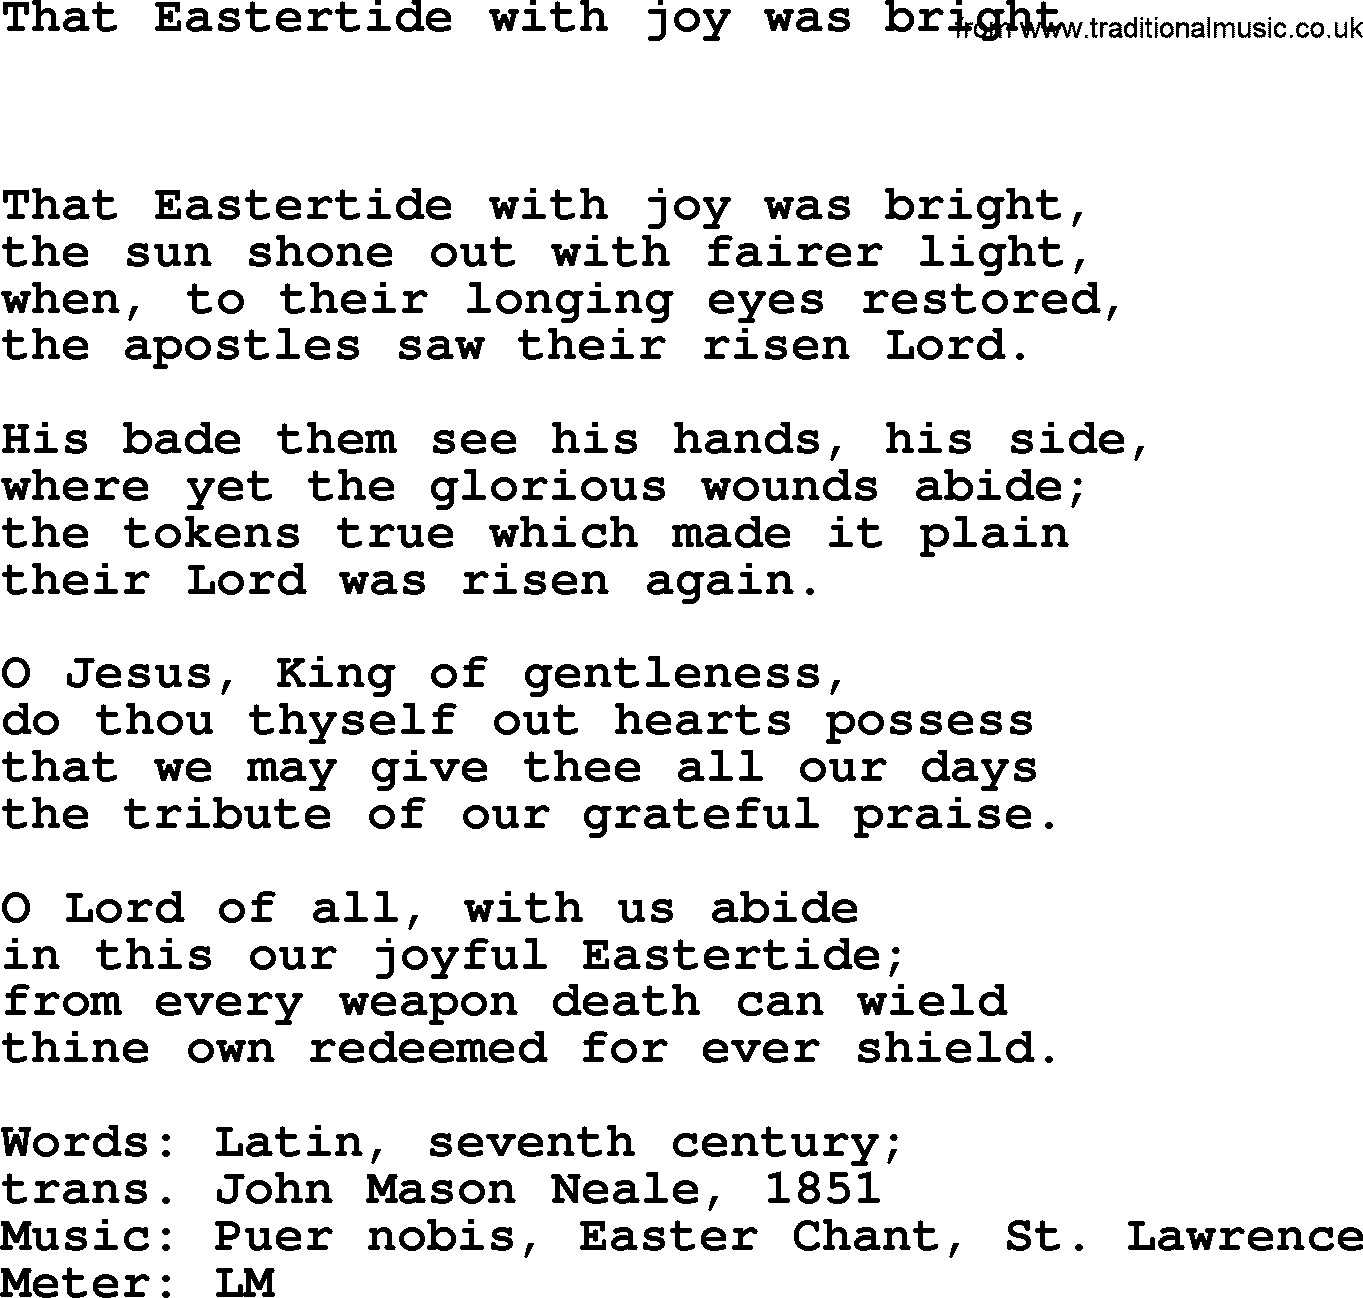 Book of Common Praise Hymn: That Eastertide With Joy Was Bright.txt lyrics with midi music